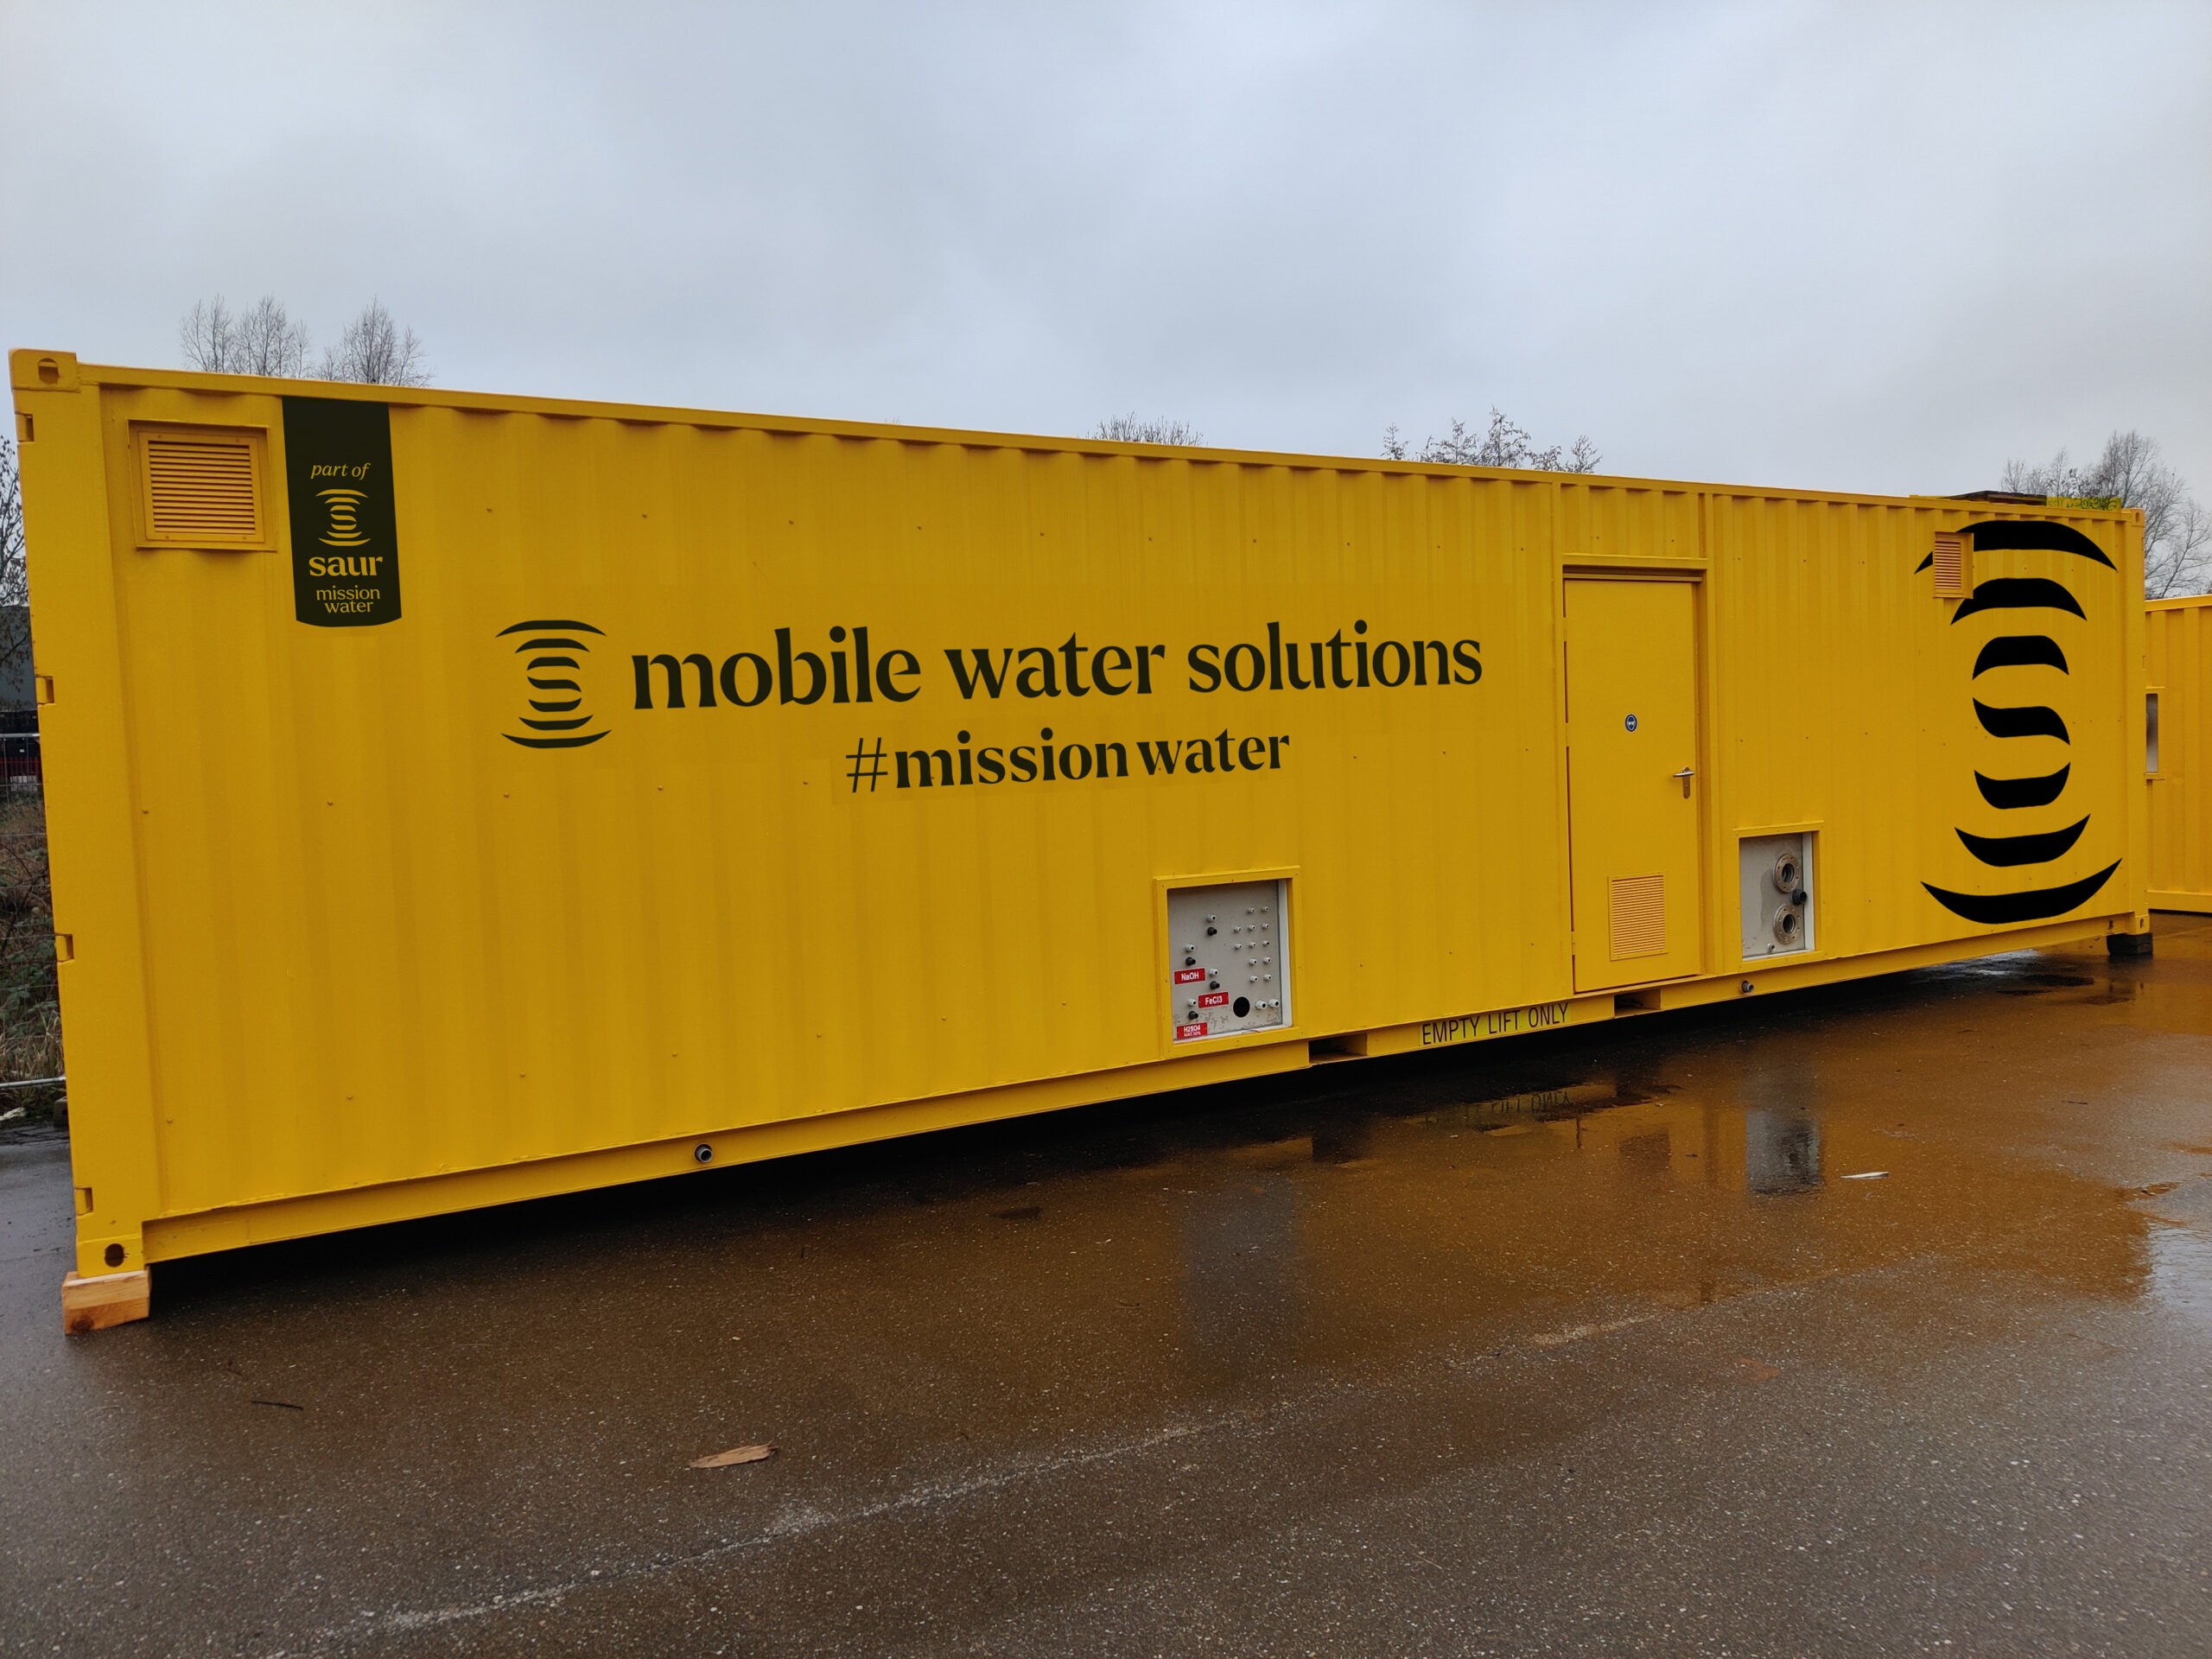 NSI Mobile Water Solutions | Scalable water technologies | Industrial Water Treatment Systems | Water Treatment Solutions | Your trusted water provider | Ideal during Maintenance | Keep your production flowing | Easy integration to your plant | Talk to an expert today | Contact Us Today